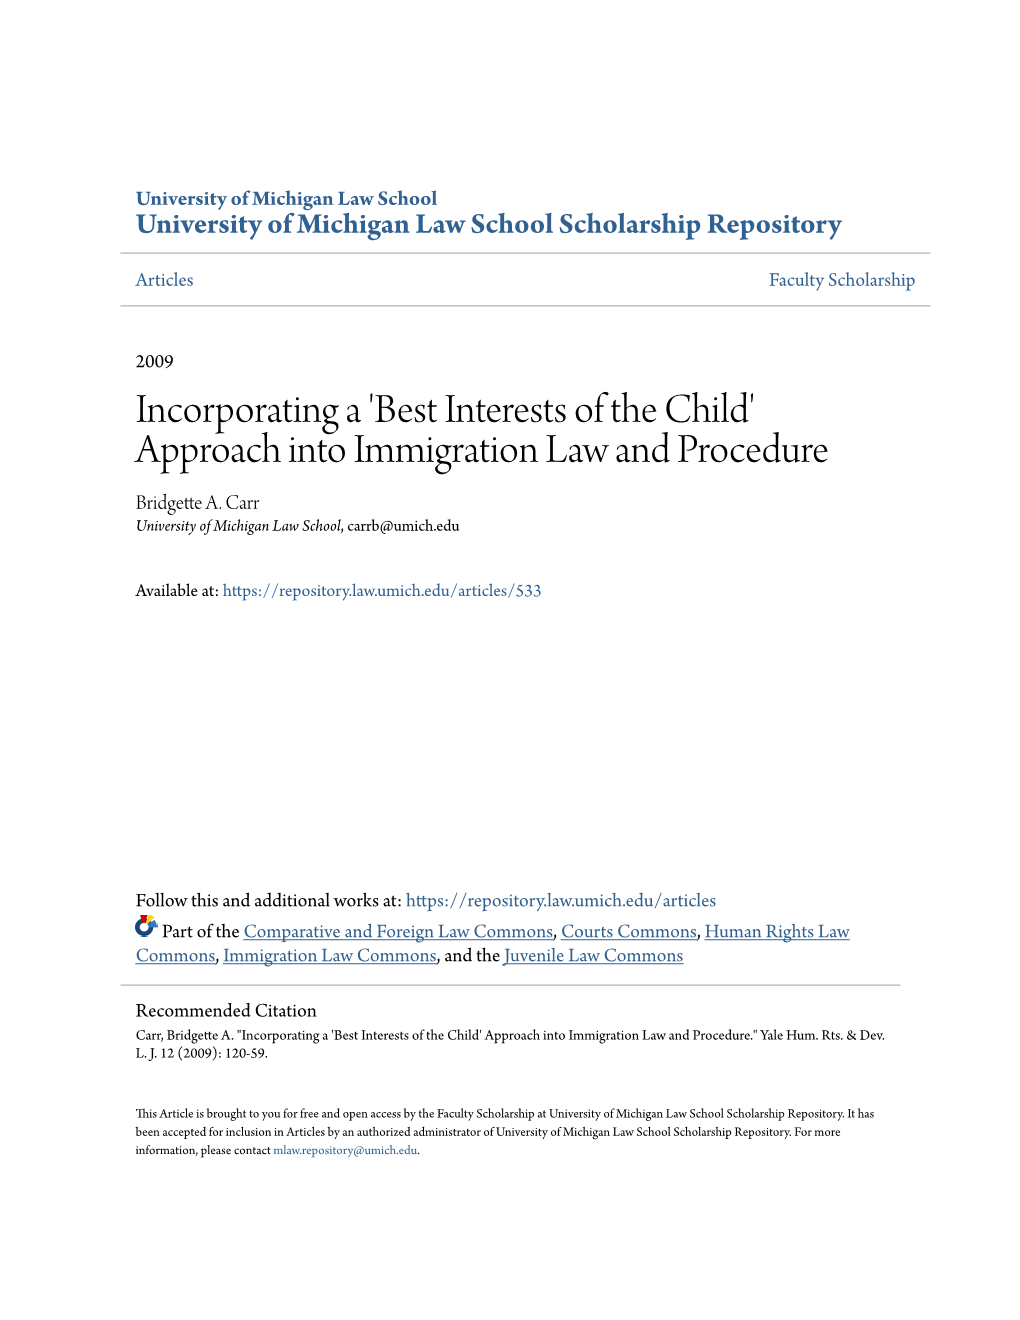 Best Interests of the Child' Approach Into Immigration Law and Procedure Bridgette A